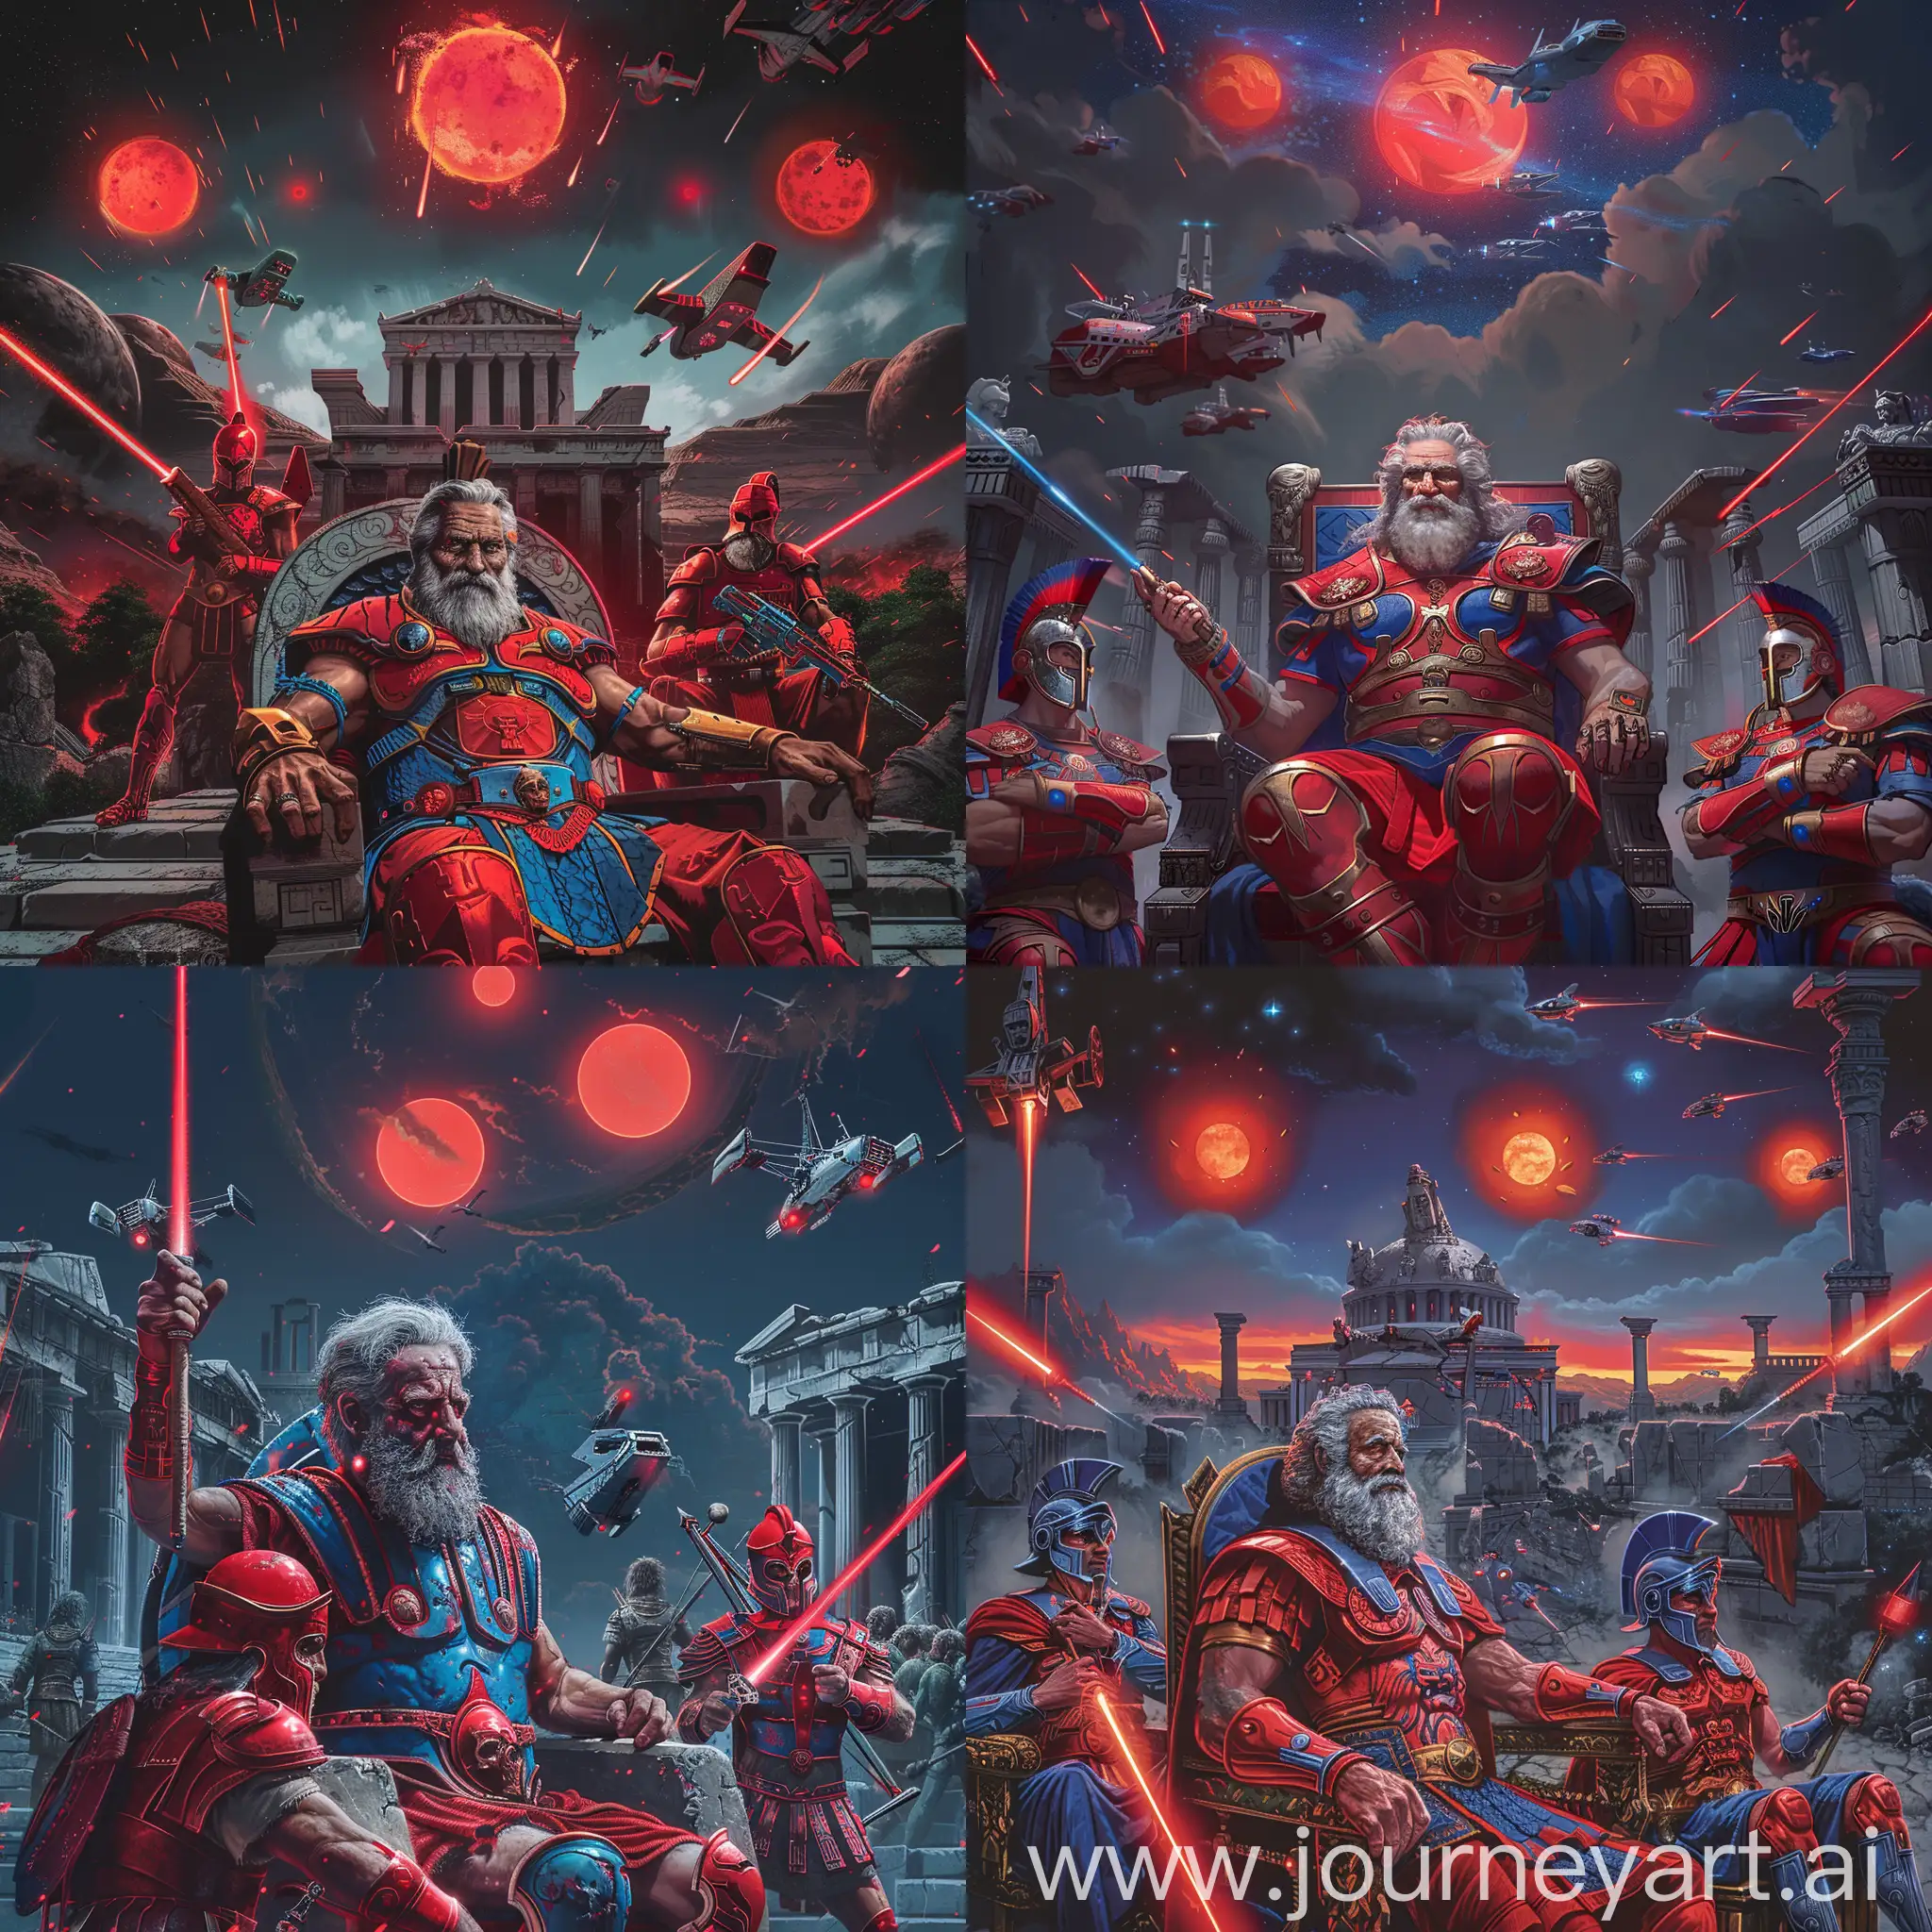 in the middle, a middle-aged Greek god Zeus, with gray hair and beards, in red and blue ancient Greek style space marine armor, sits on his Greek royal throne,

ancient Greek cyborgs hoplites in red blue armor are next to Zeus, hold laser spears,

futuristic steel gray Greek temples is in the background,

three red suns in the dark sky, with Ancient Greek style Spaceships flying,